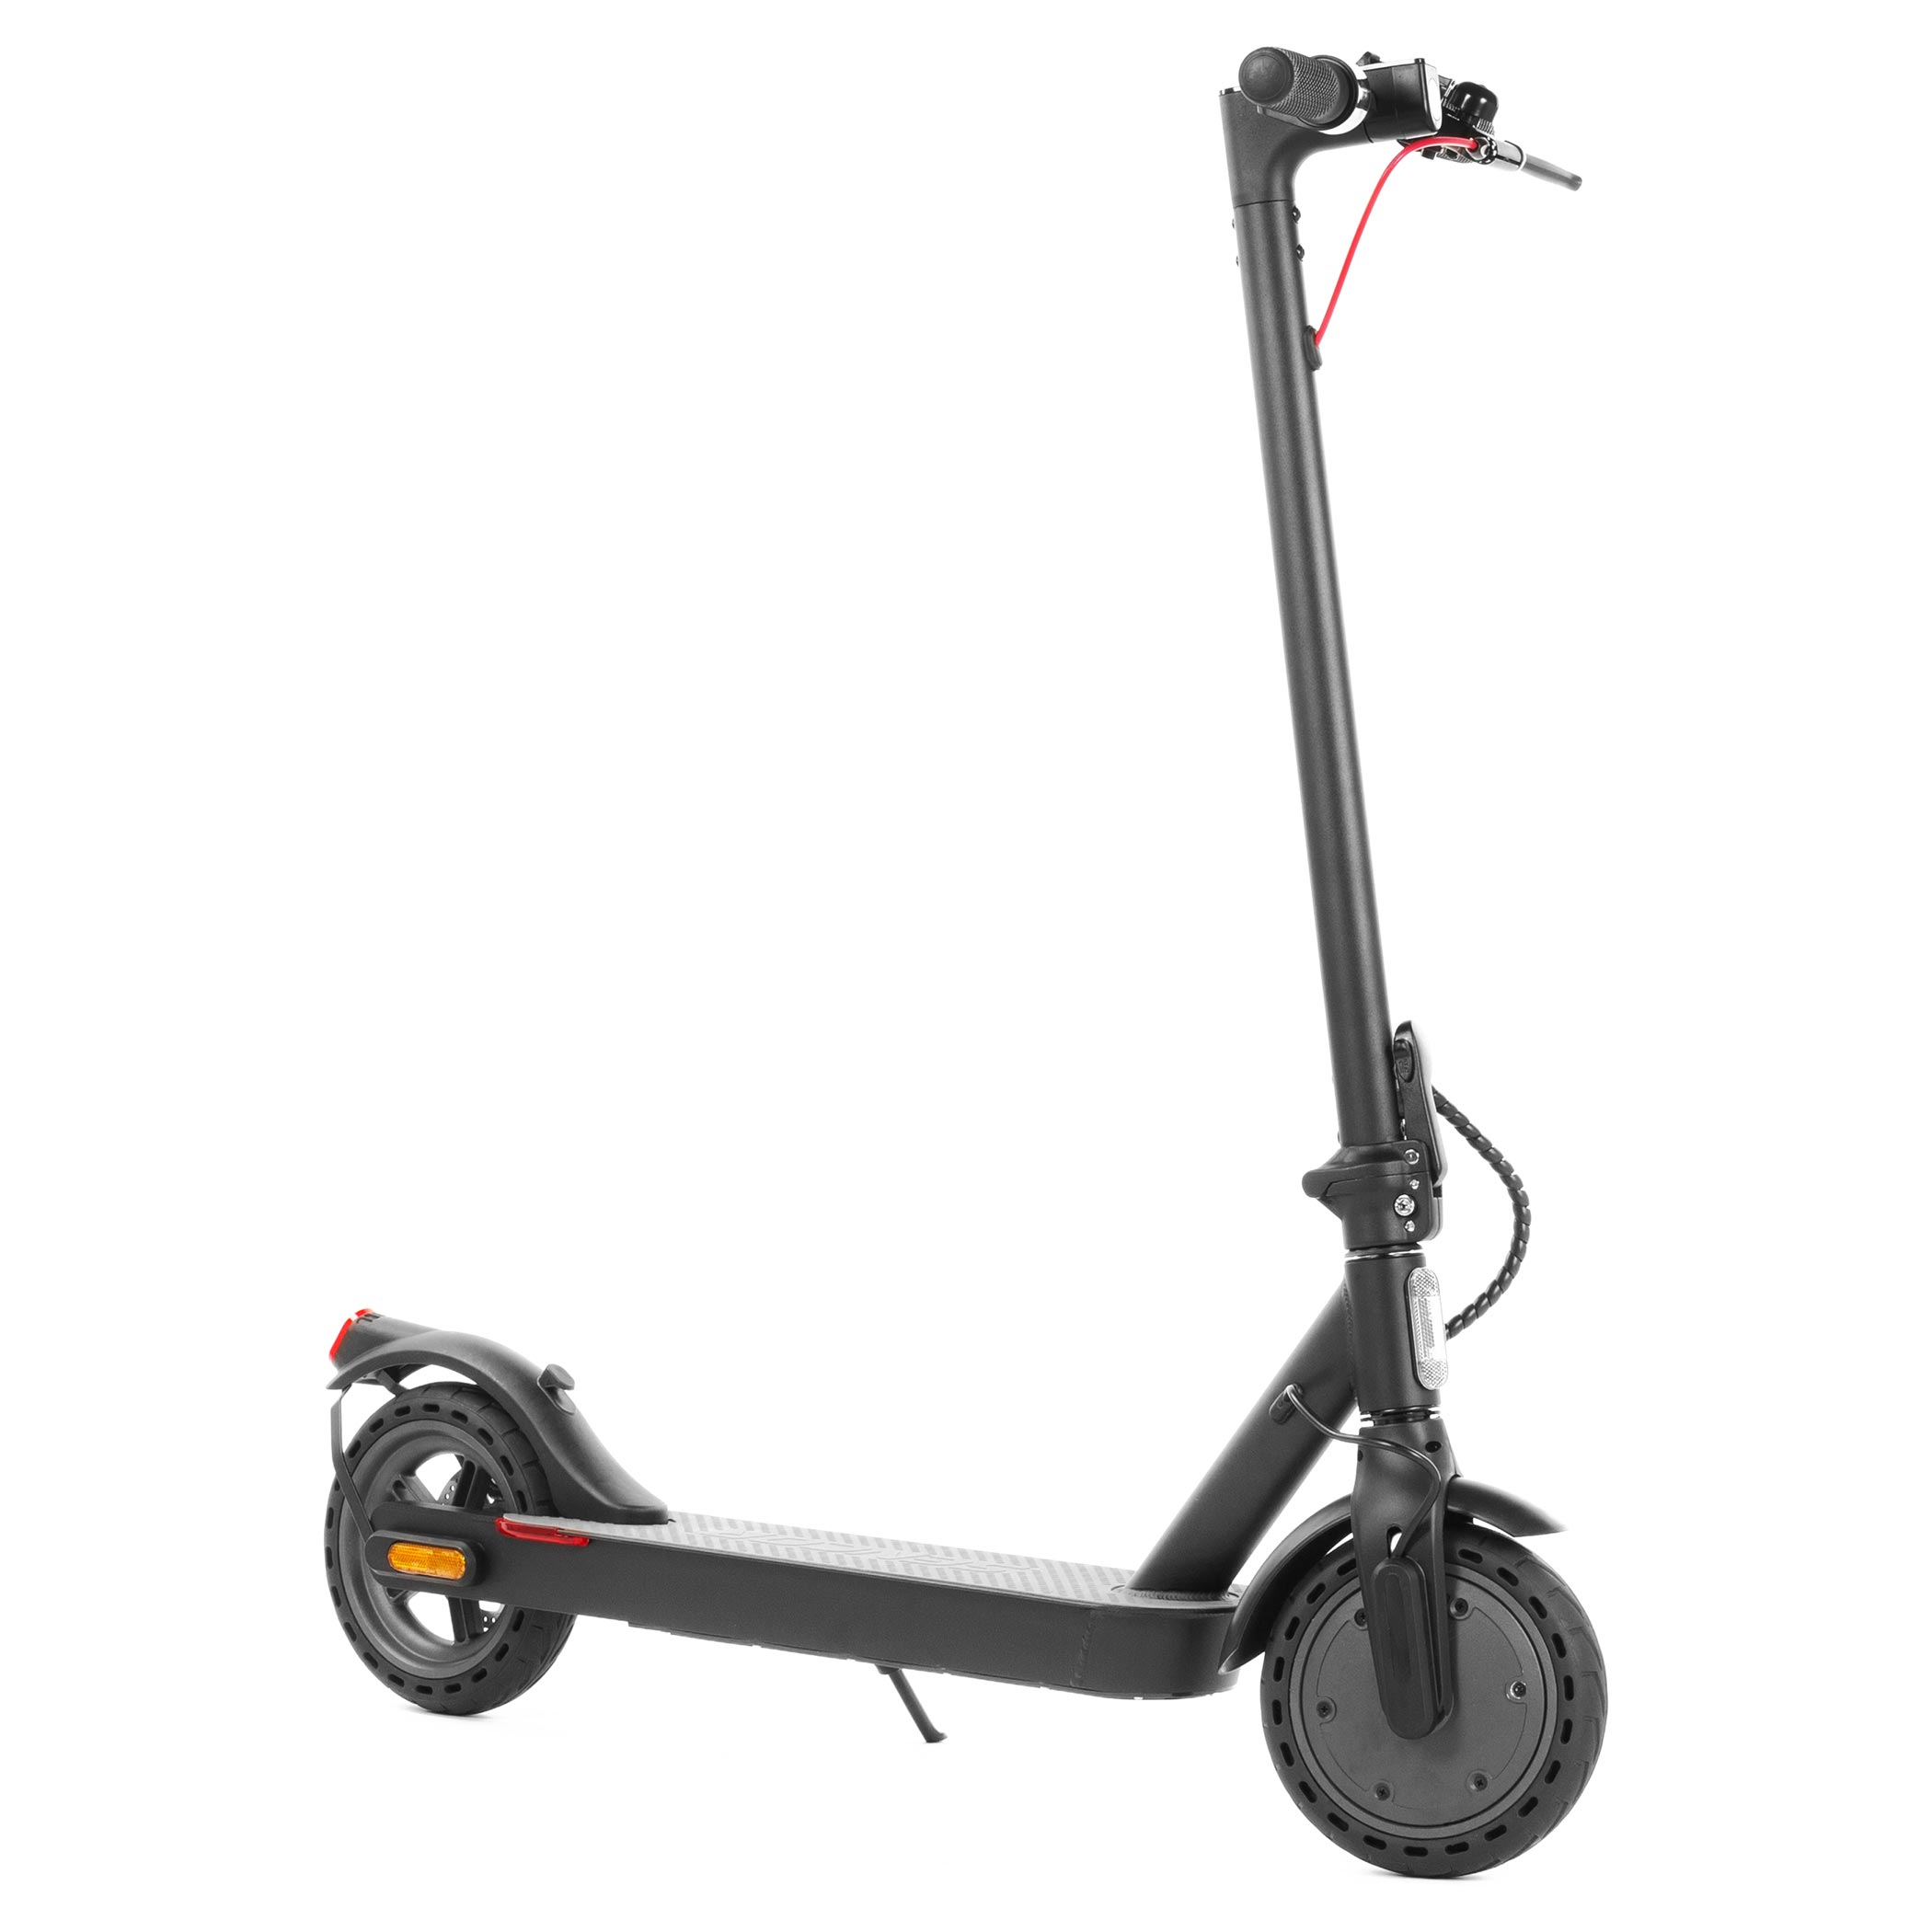 🛴 Scooter | Scooter Sencor